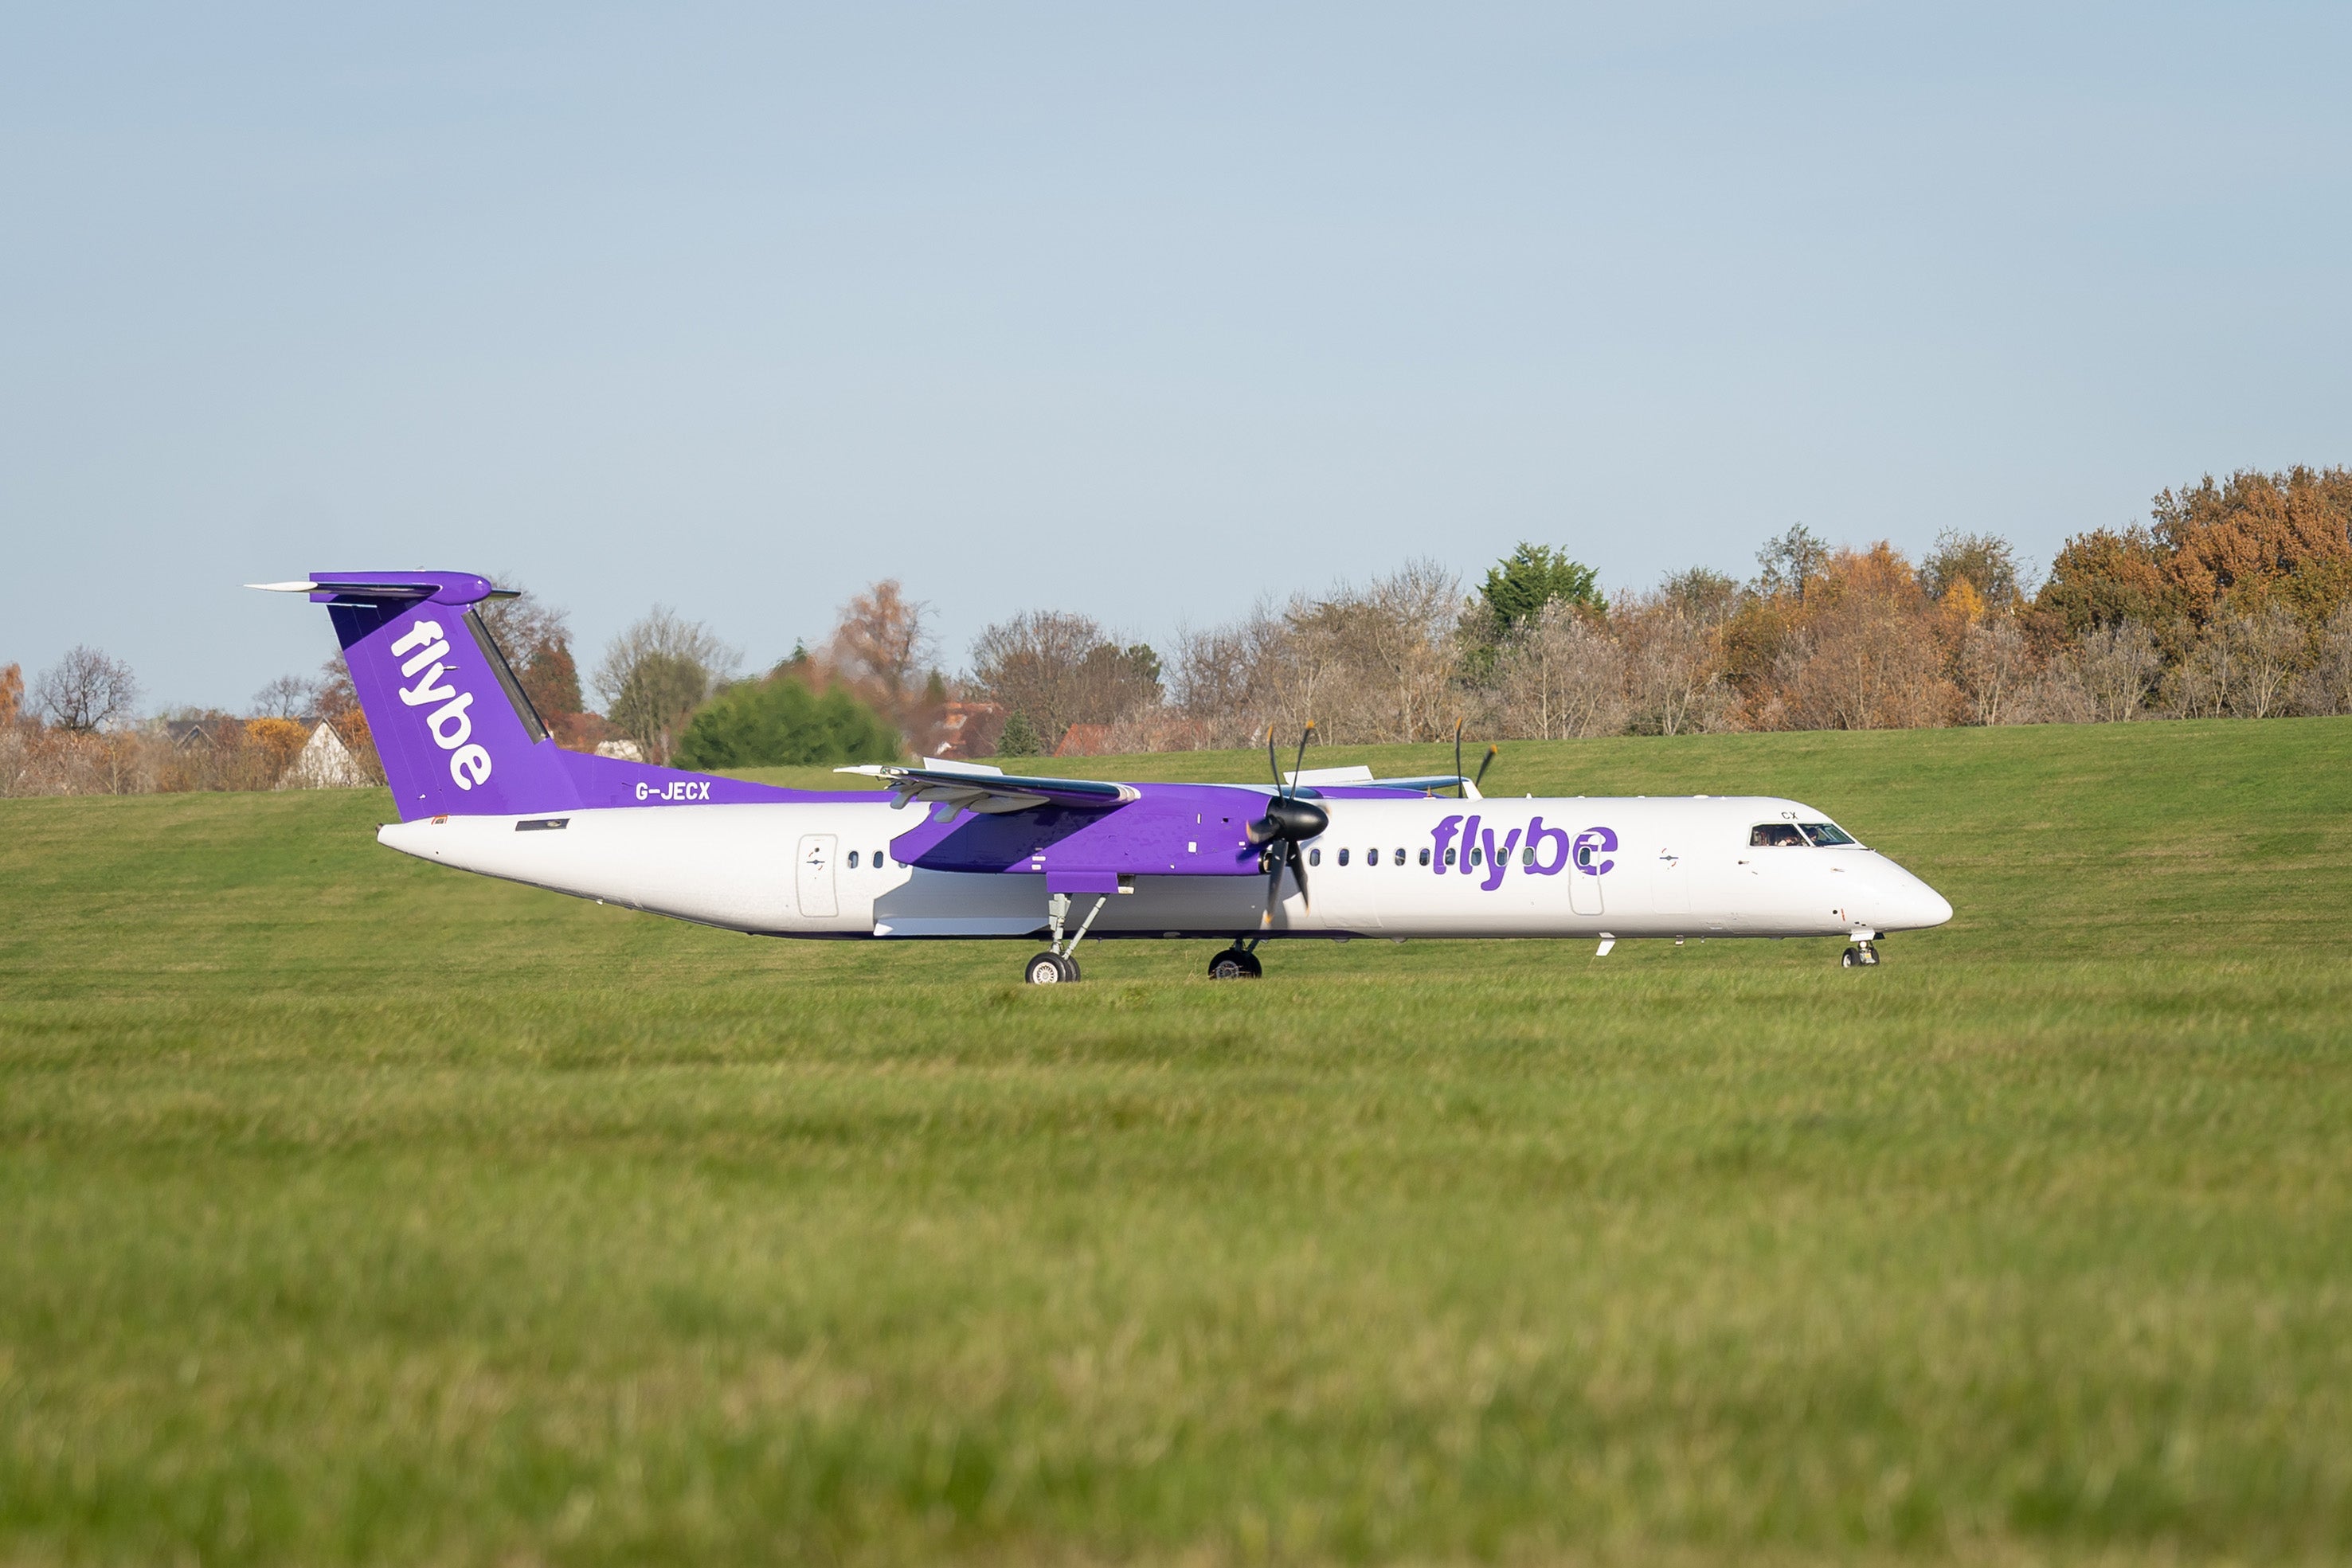 Ready to go: Flybe Q400 aircraft